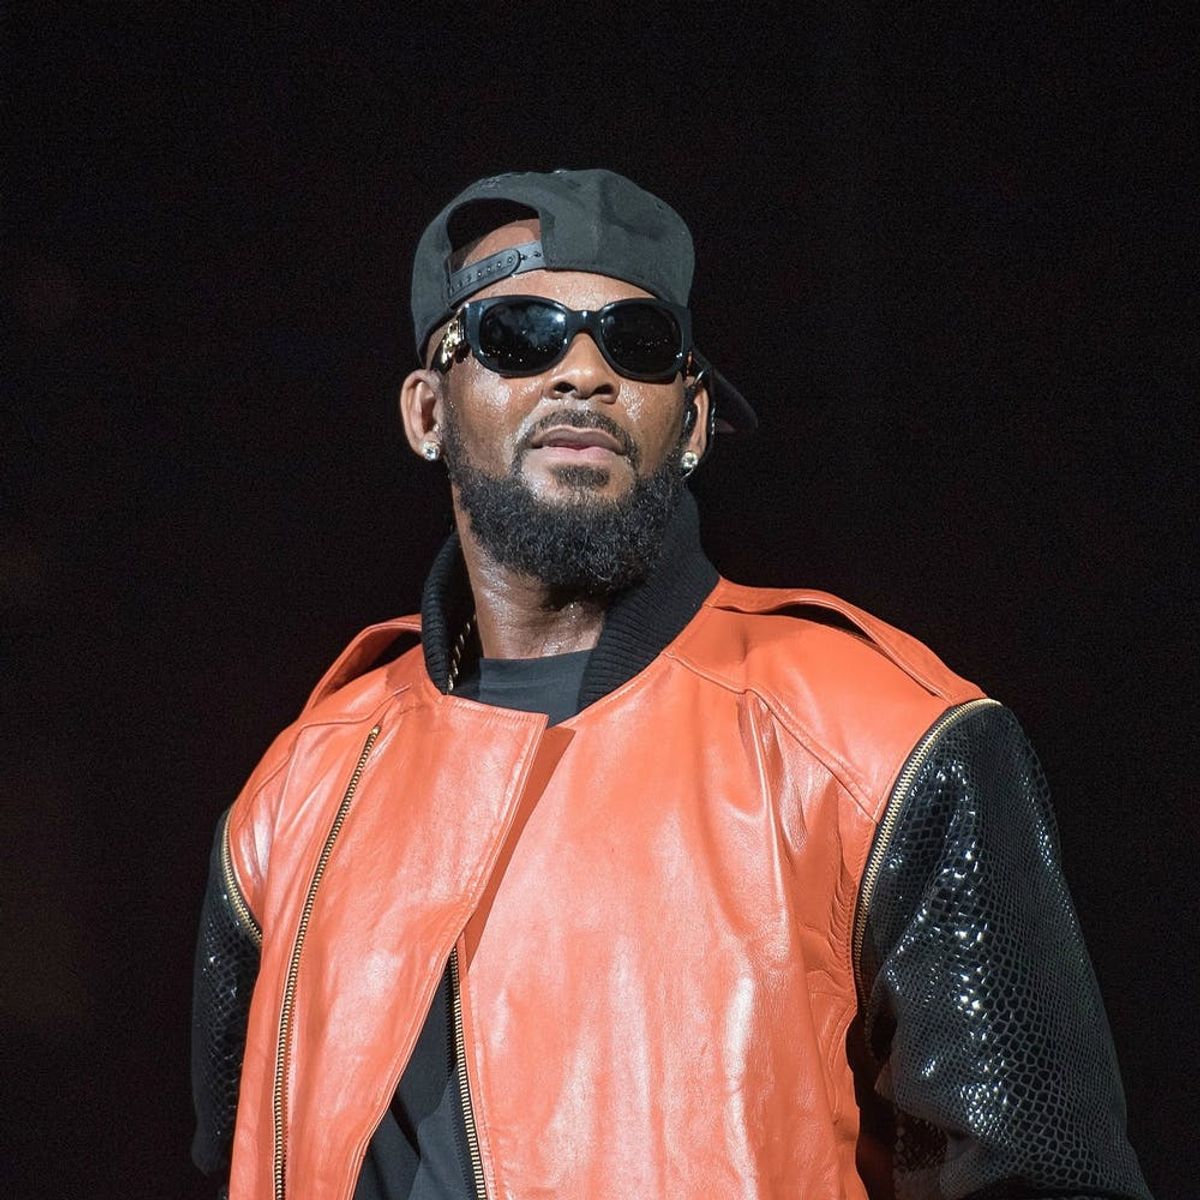 Georgia Authorities Have Reportedly Launched an Investigation into Allegations of Abuse Against R. Kelly